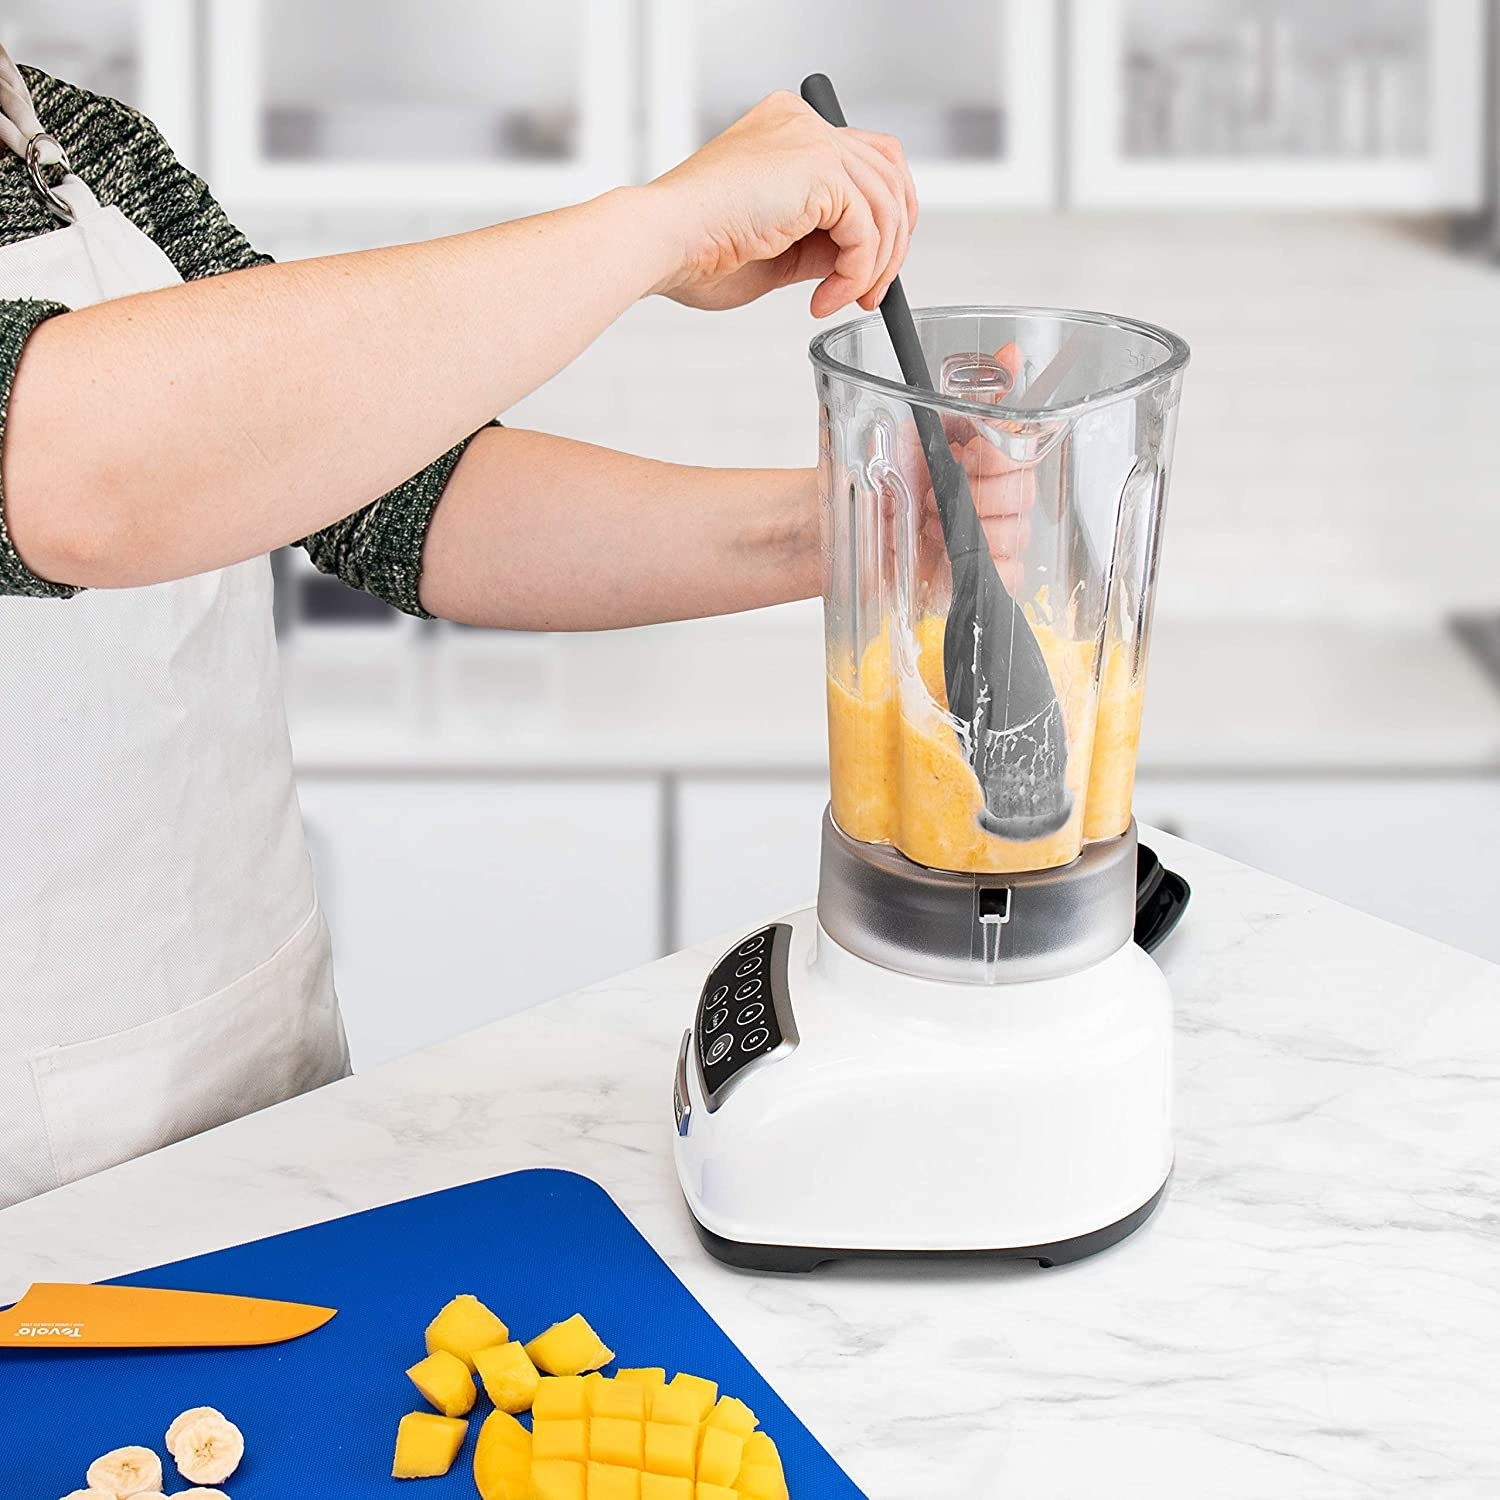 A person using the spatula in their blender